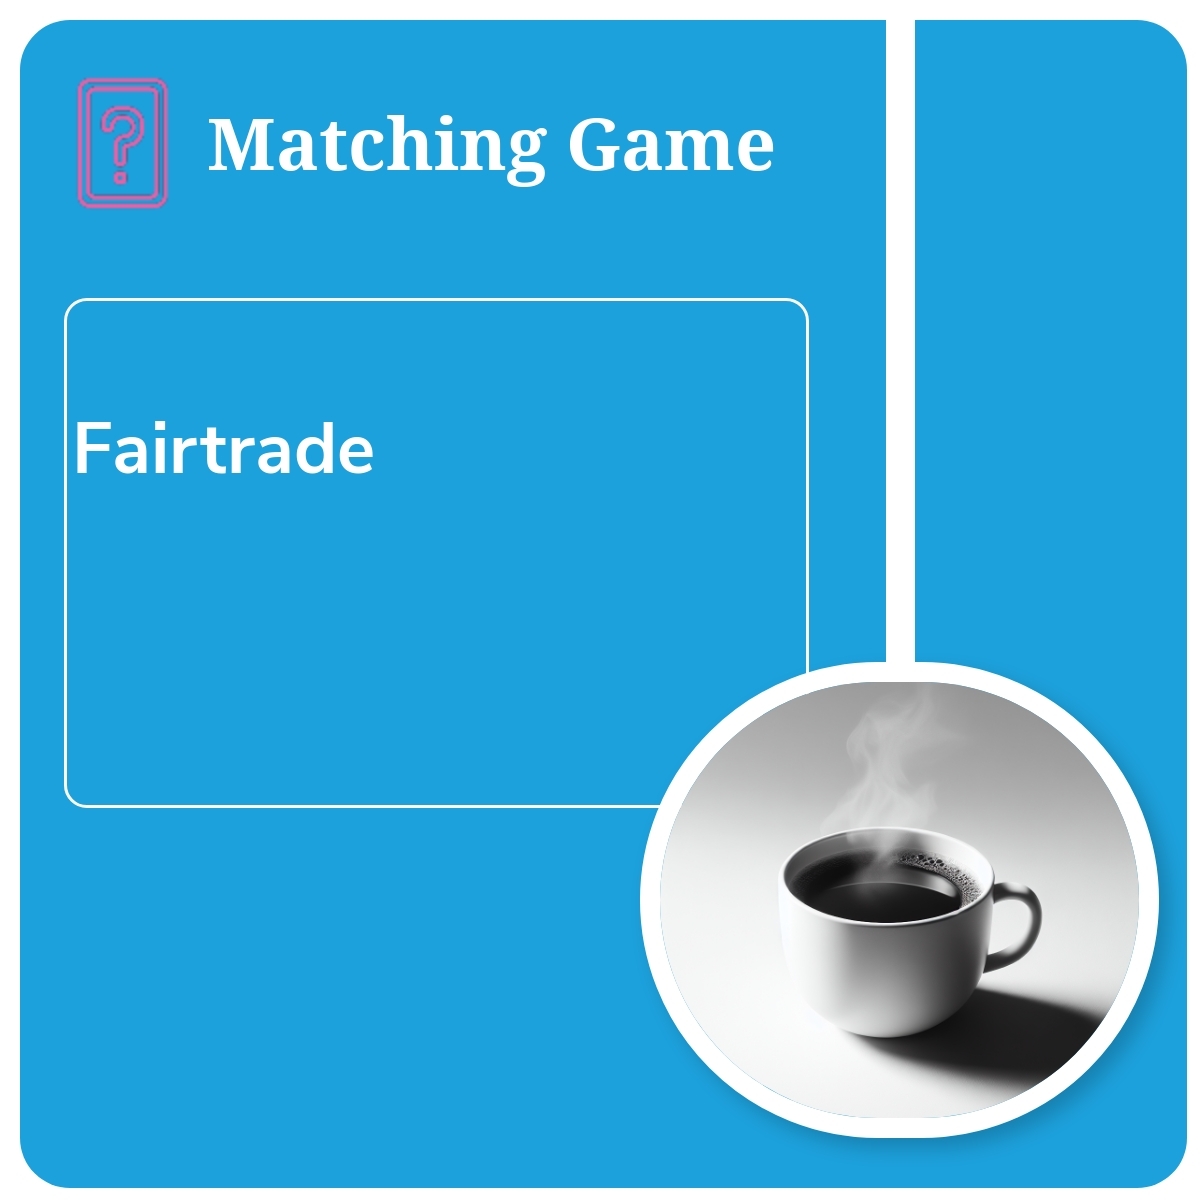 Matching Words to Definitions: Fairtrade